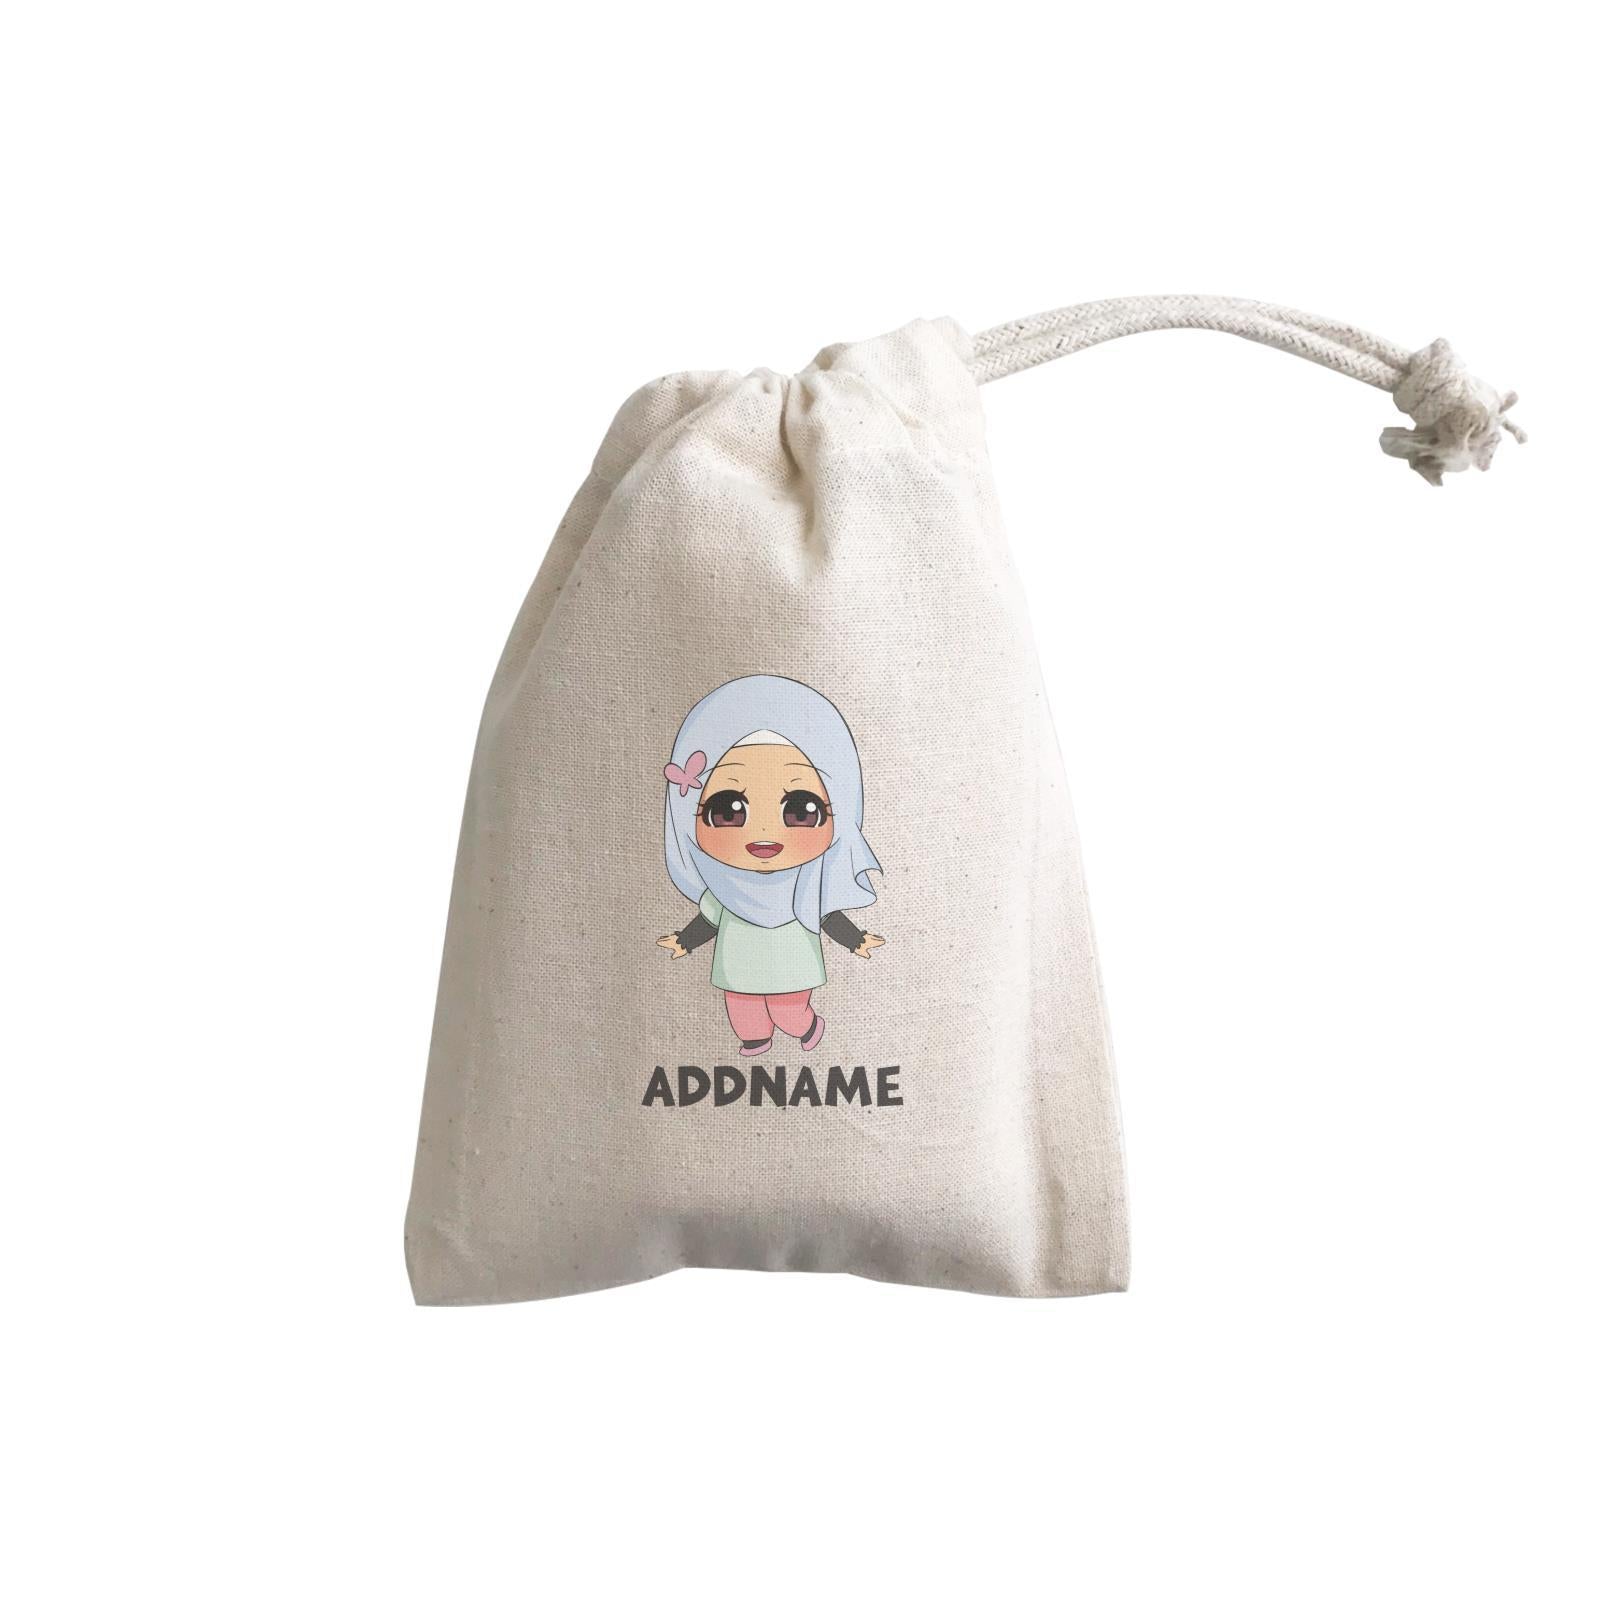 Children's Day Gift Series Little Malay Girl Addname  Gift Pouch